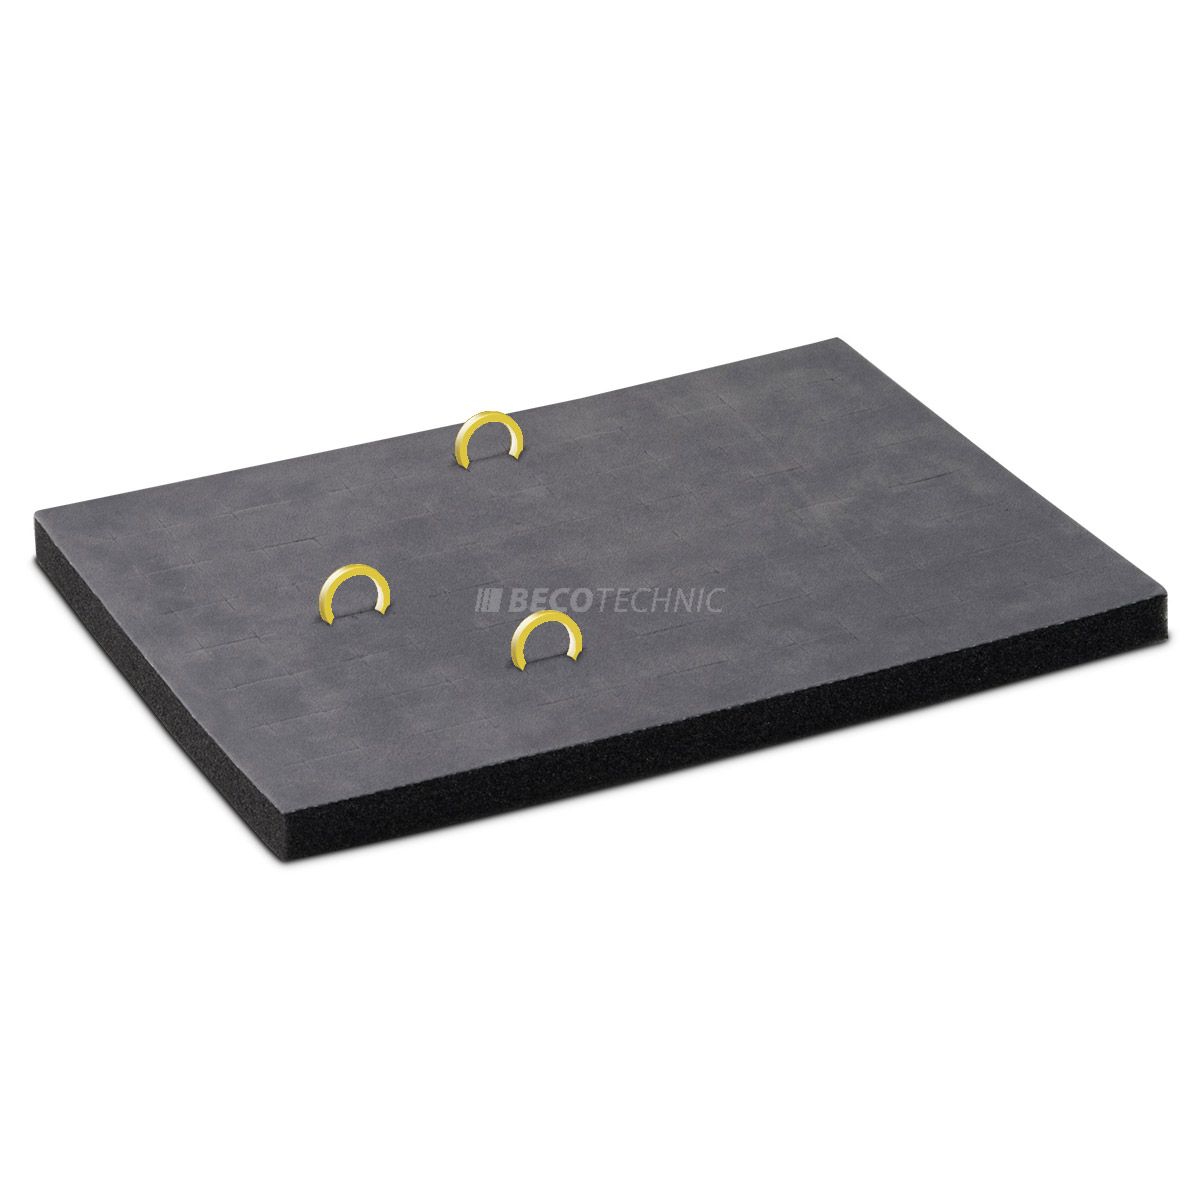 Velvet covered inlay for 49 rings suitable for small tray 293 x 220 mm